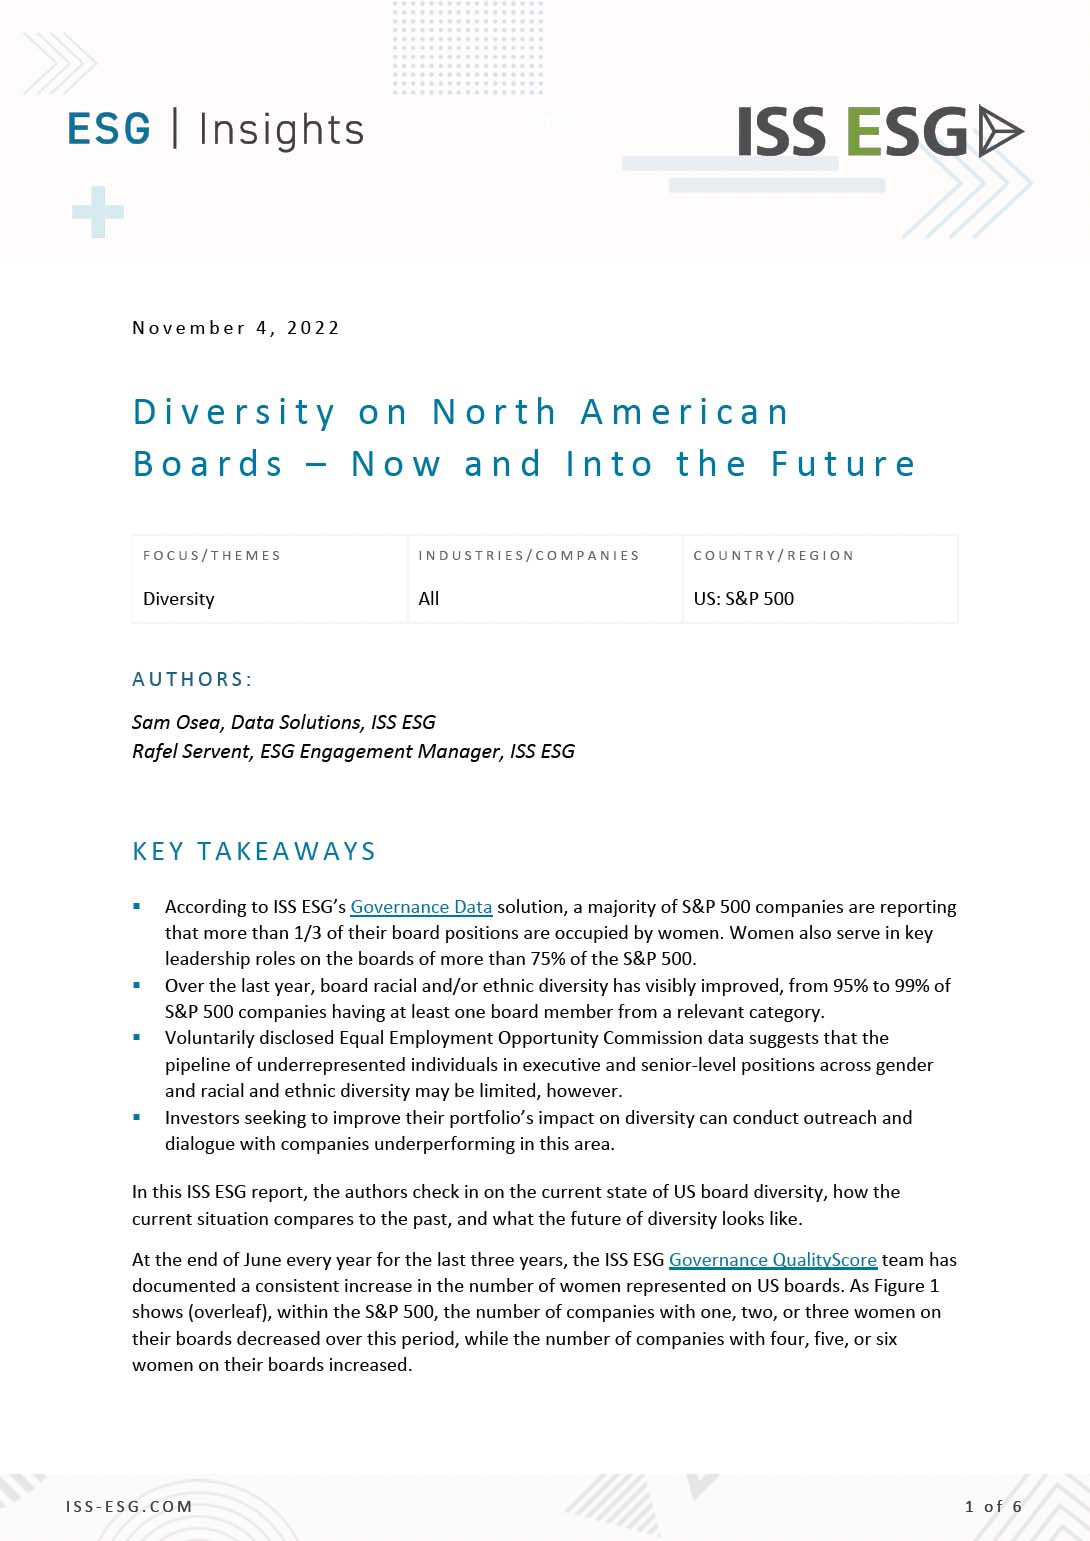 Diversity on North American Boards – Now and Into the Future